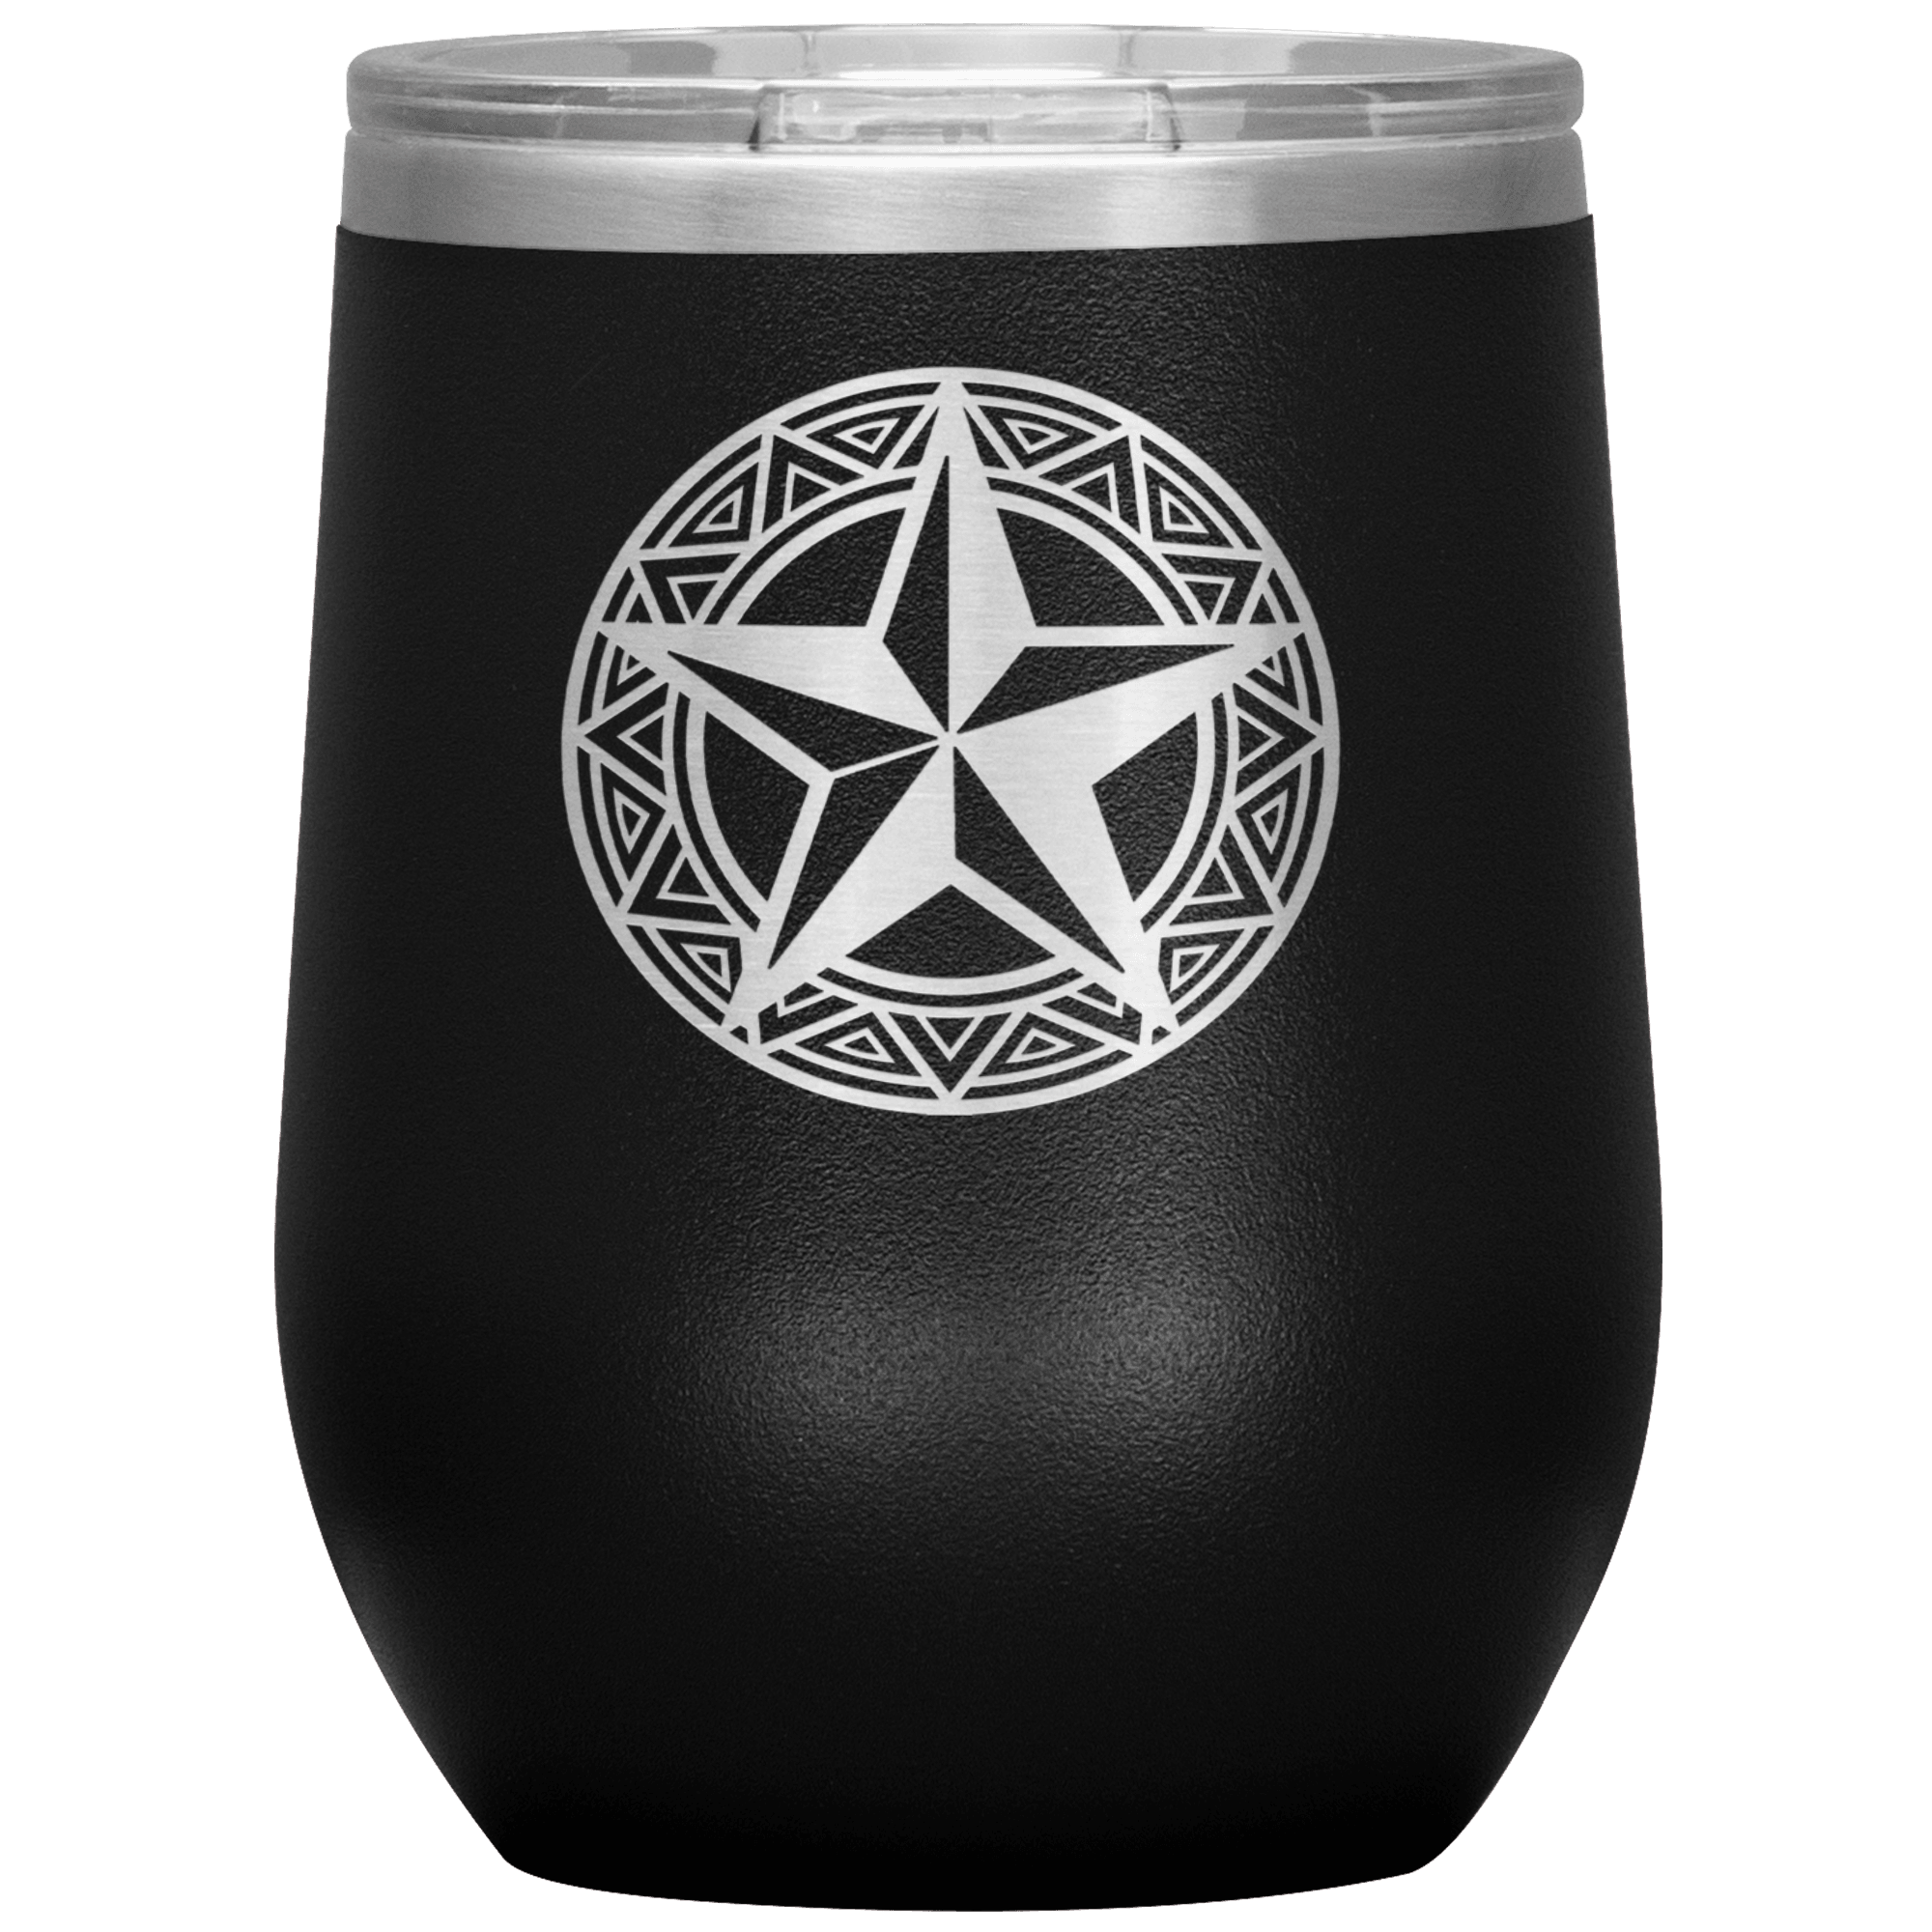 Star Wars 12 Ounce Stainless Steel Stemless Wine Glass